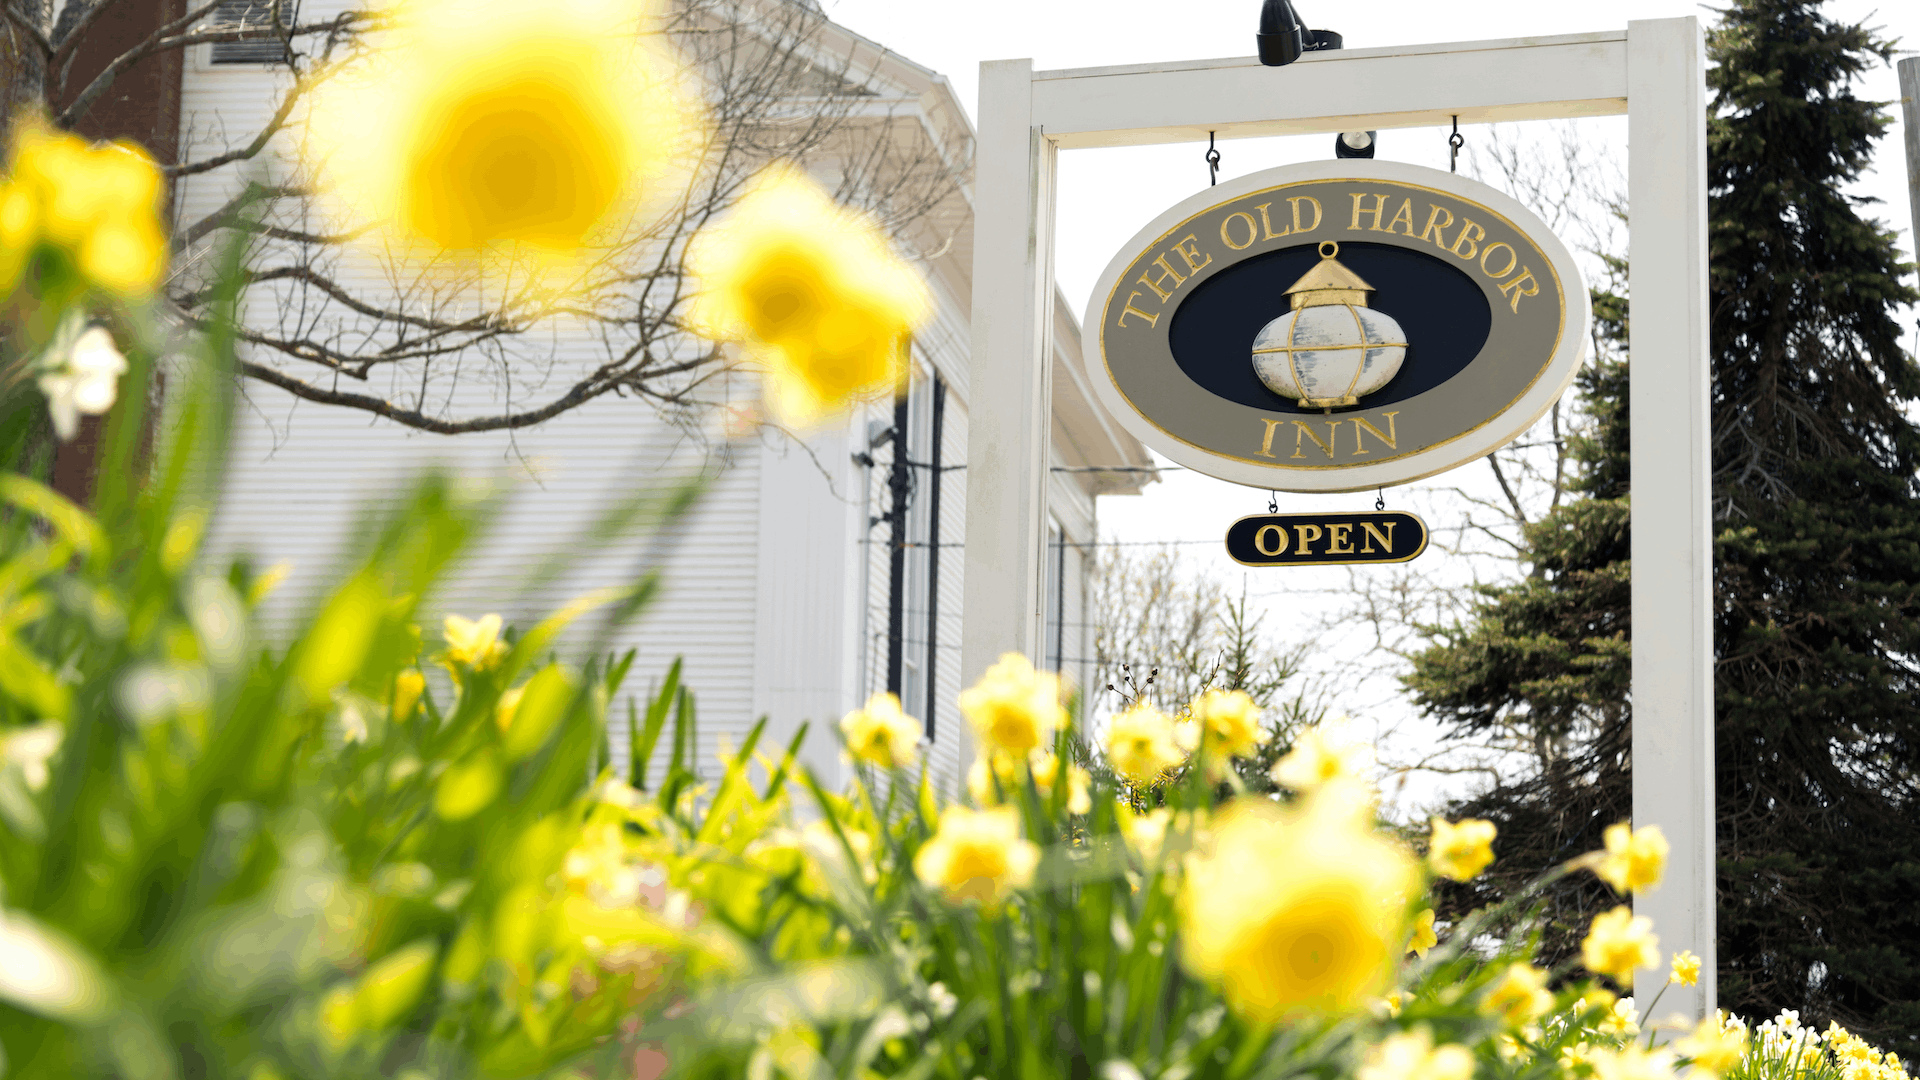 spring garden with blooming daffodils and wooden sign for The Old Harbor Inn